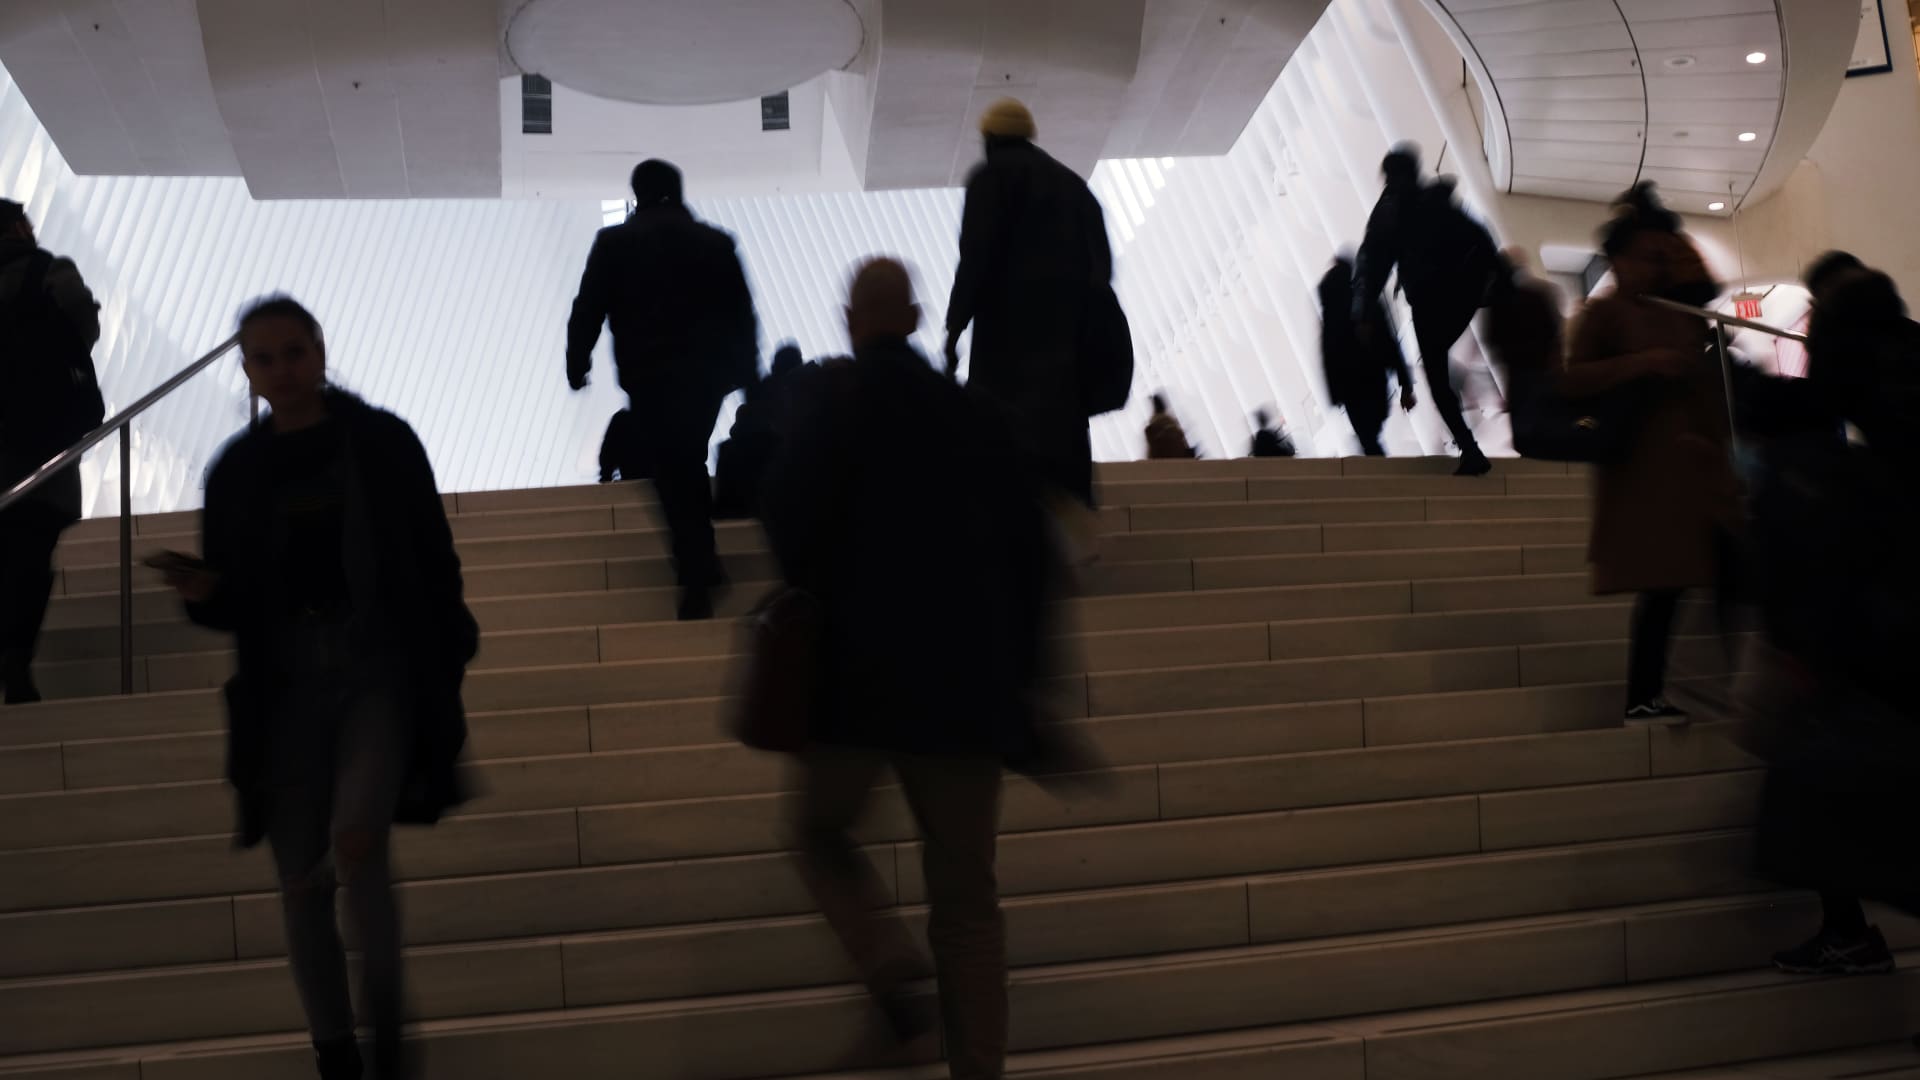 Commuters arrive into the Oculus station and mall in Manhattan, New York, Nov. 17, 2022.